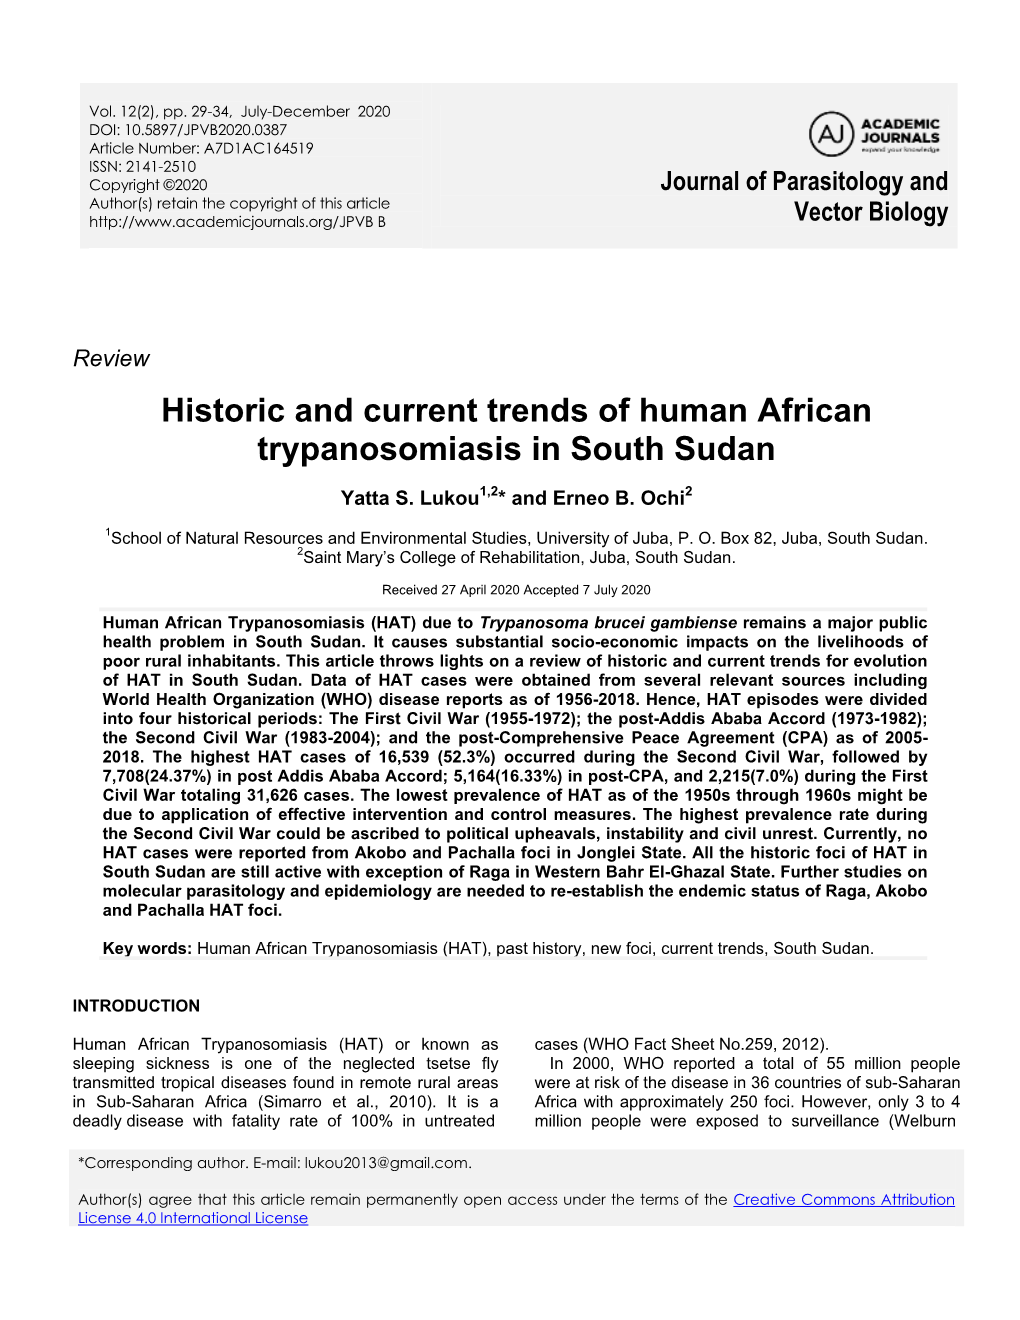 Historic and Current Trends of Human African Trypanosomiasis in South Sudan